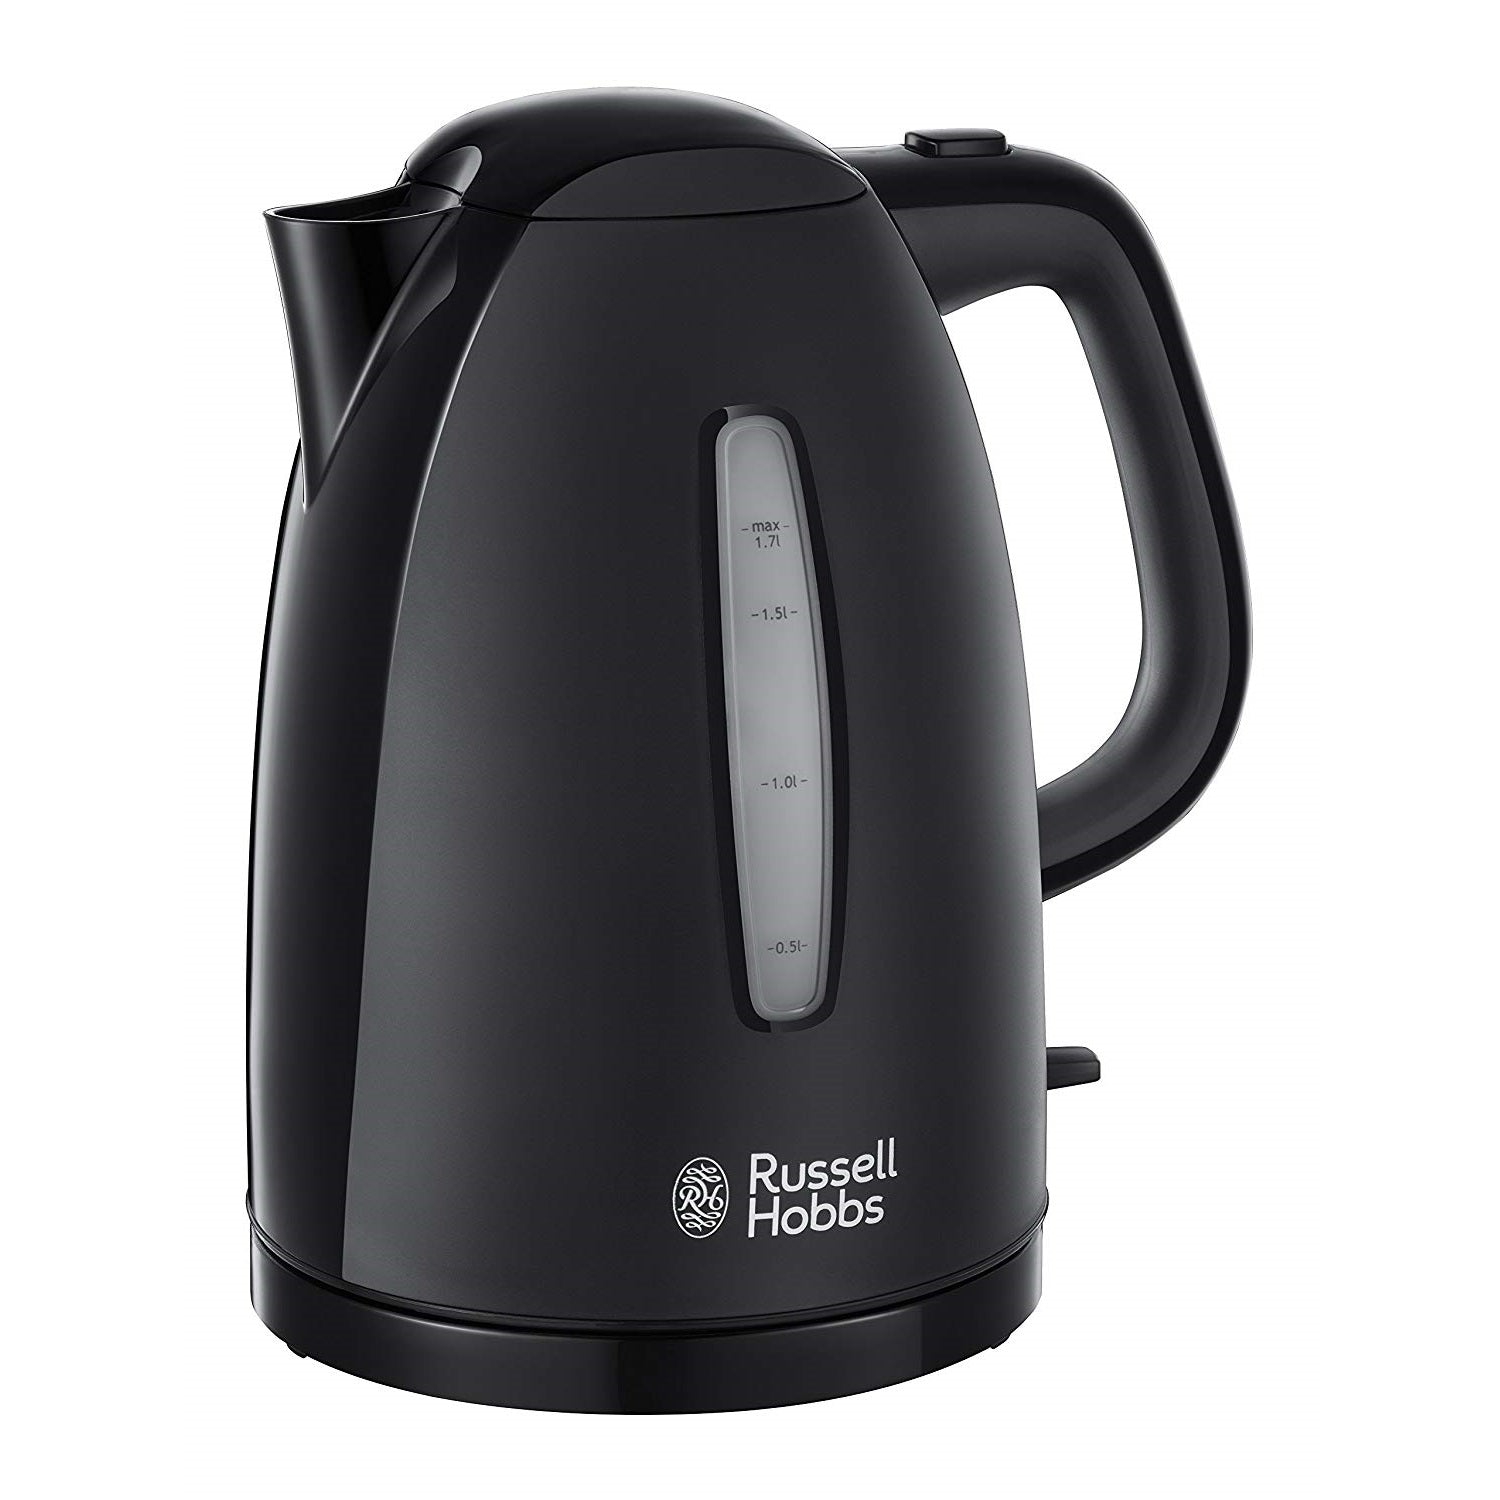 Russell Hobbs 20441 Jug Kettle 1.7Ltr Brushed Stainless Steel  Buy Electric  Kettles from Russell Hobbs35.99 – W Hurst & Son (IW) Ltd